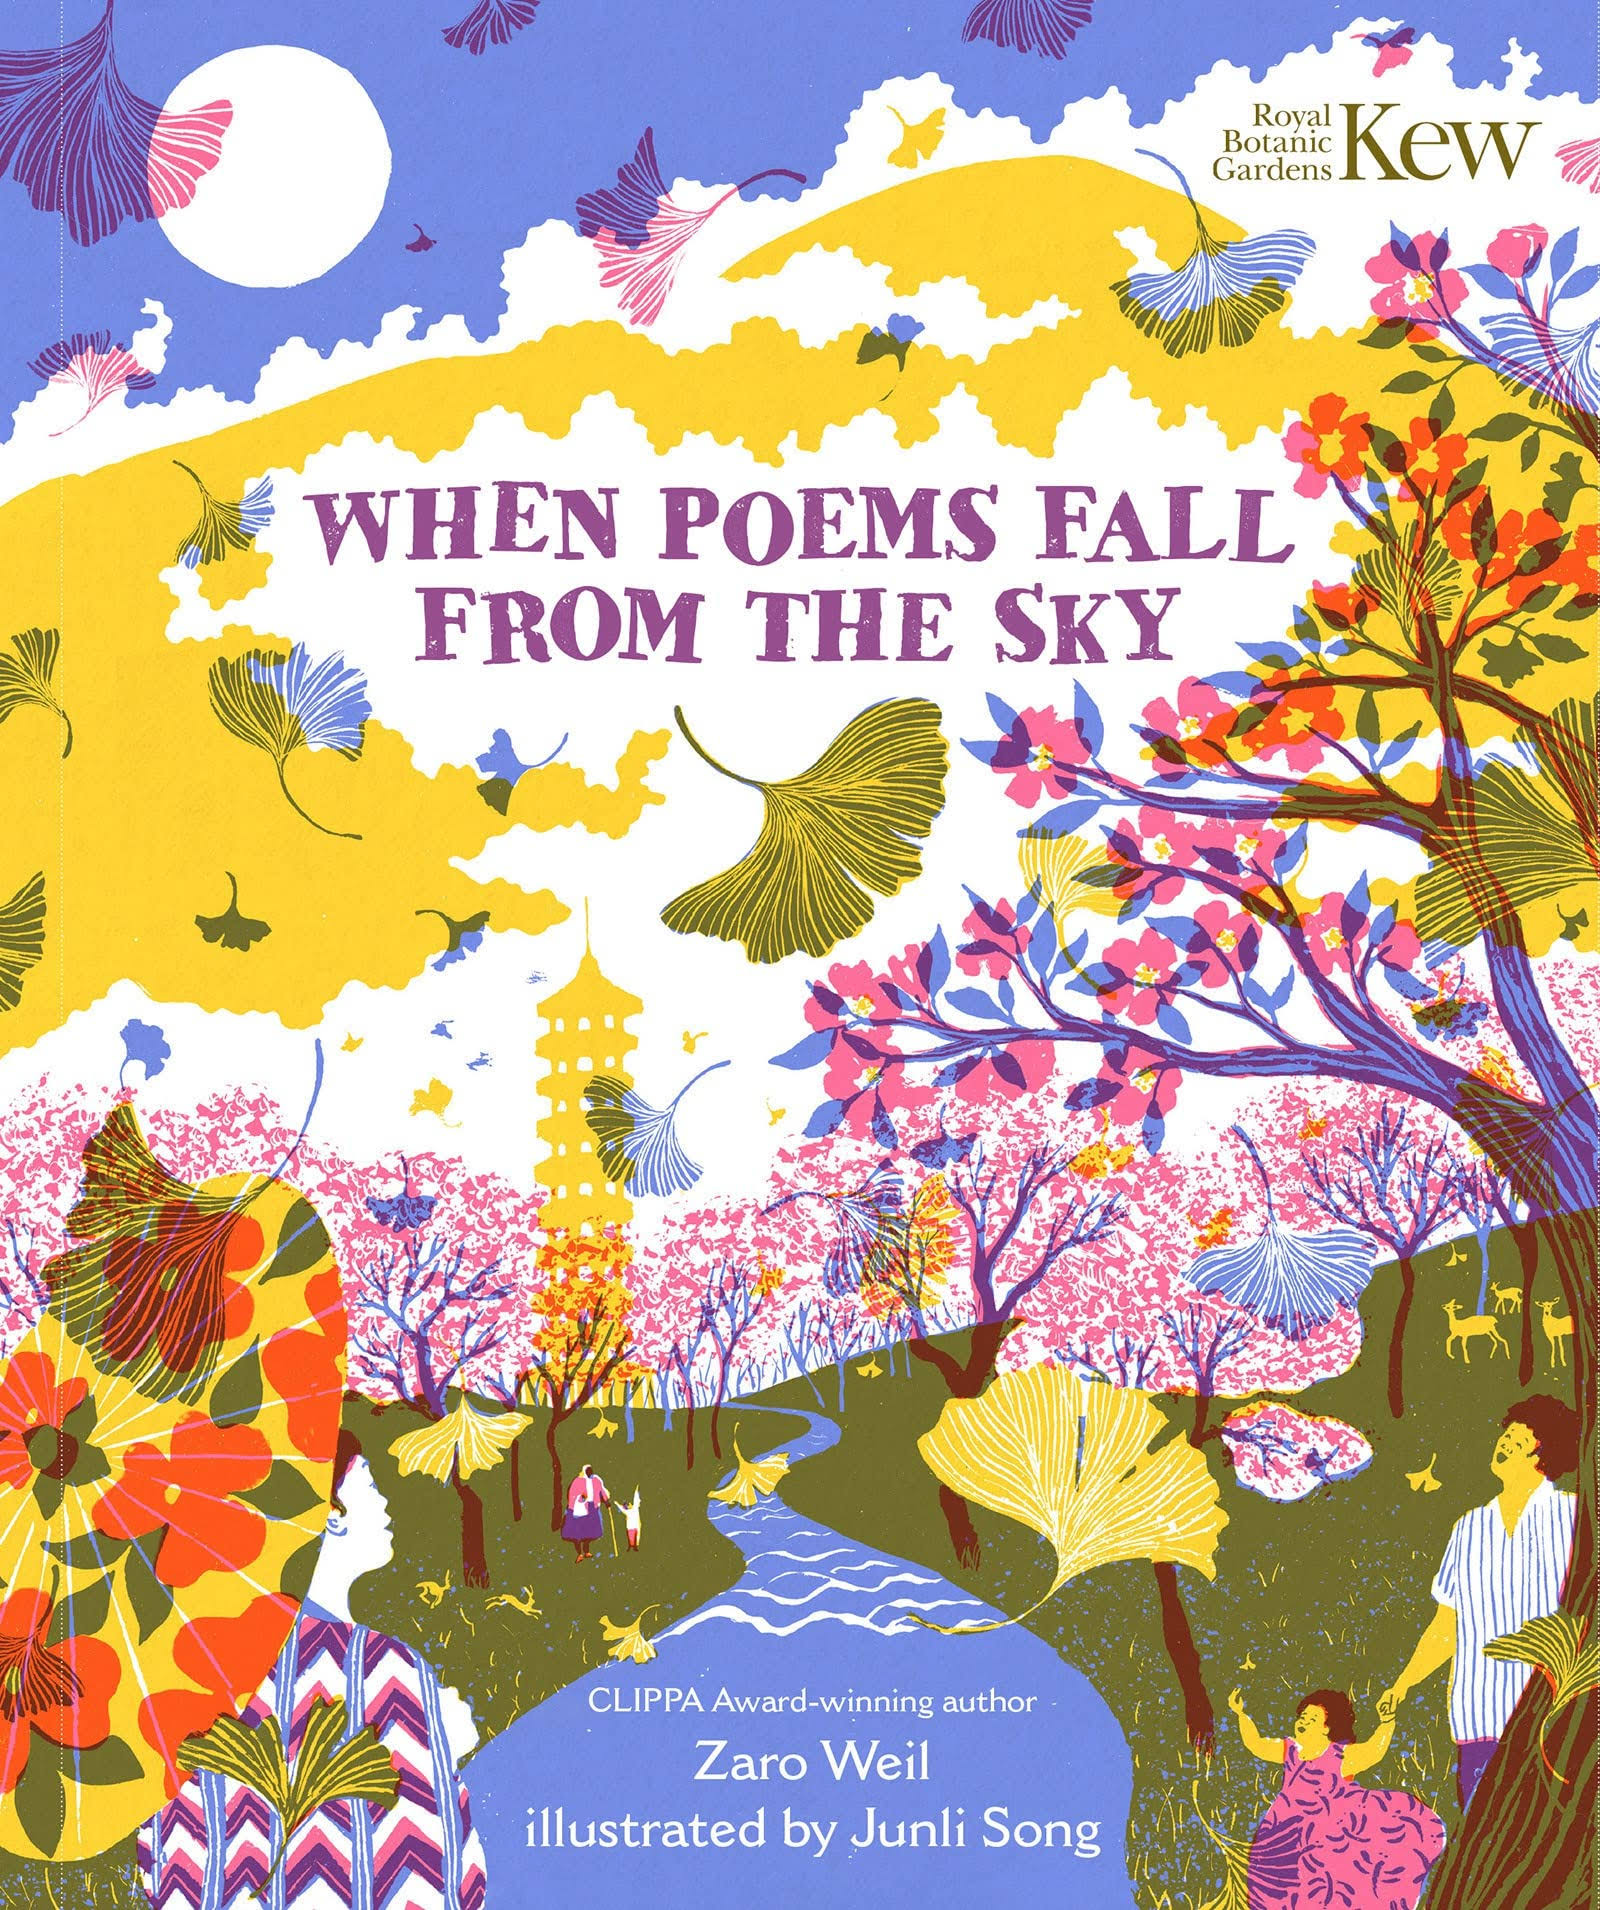 When Poems Fall from the Sky [Book]